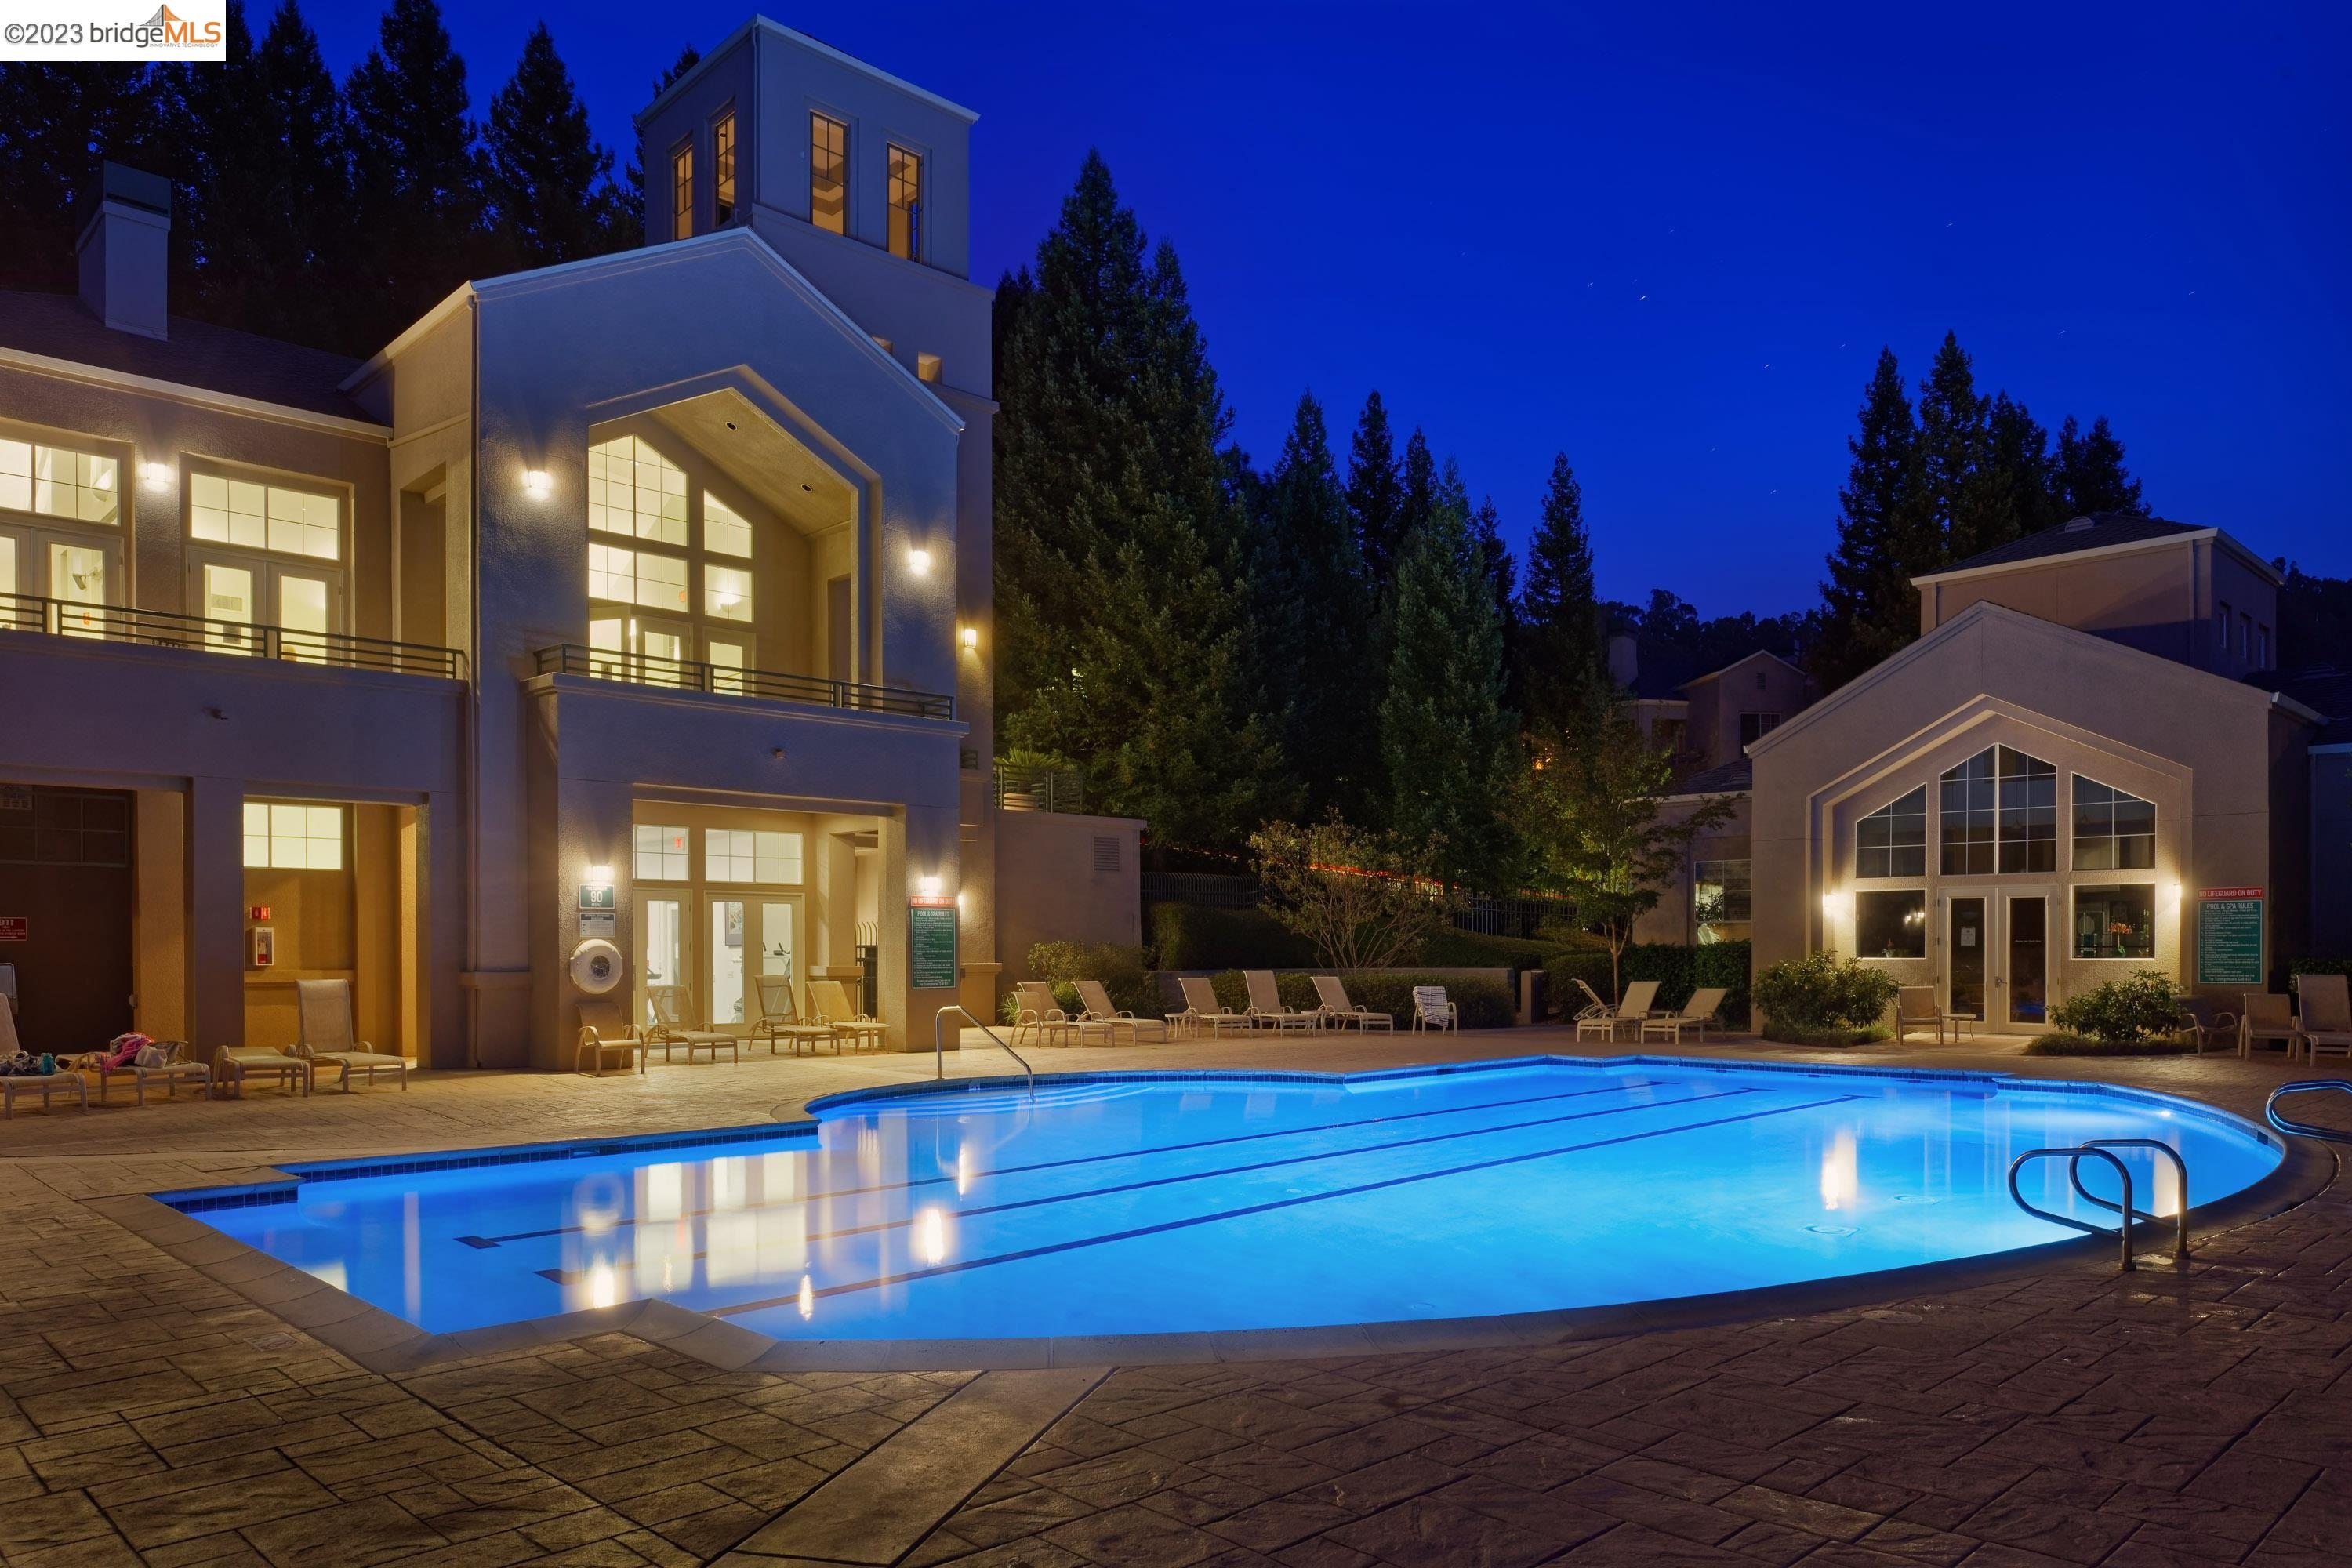 a view of a house with swimming pool yard and outdoor seating